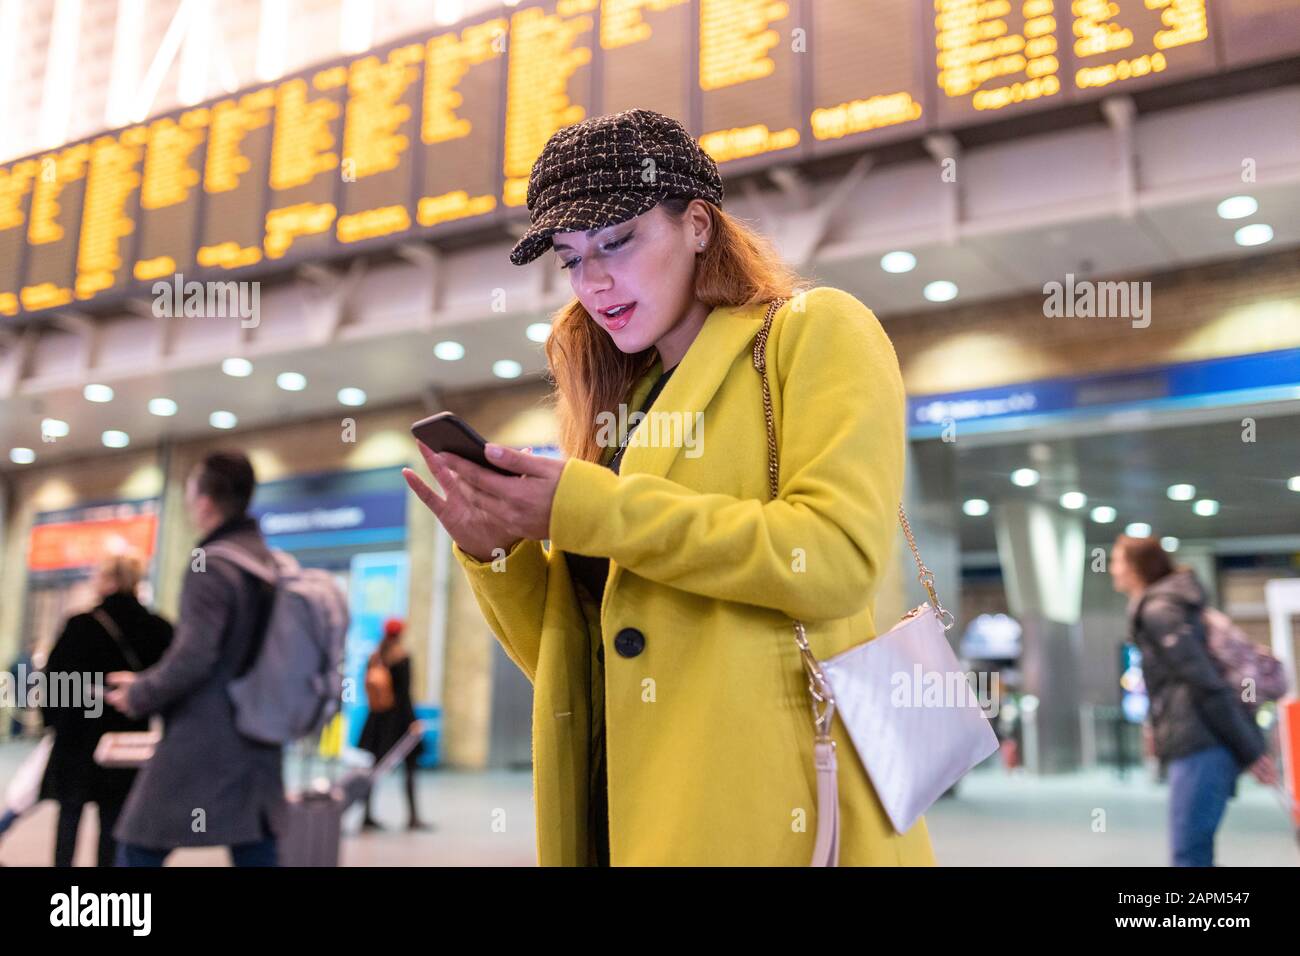 Woman at train station checking her smartphone Stock Photo